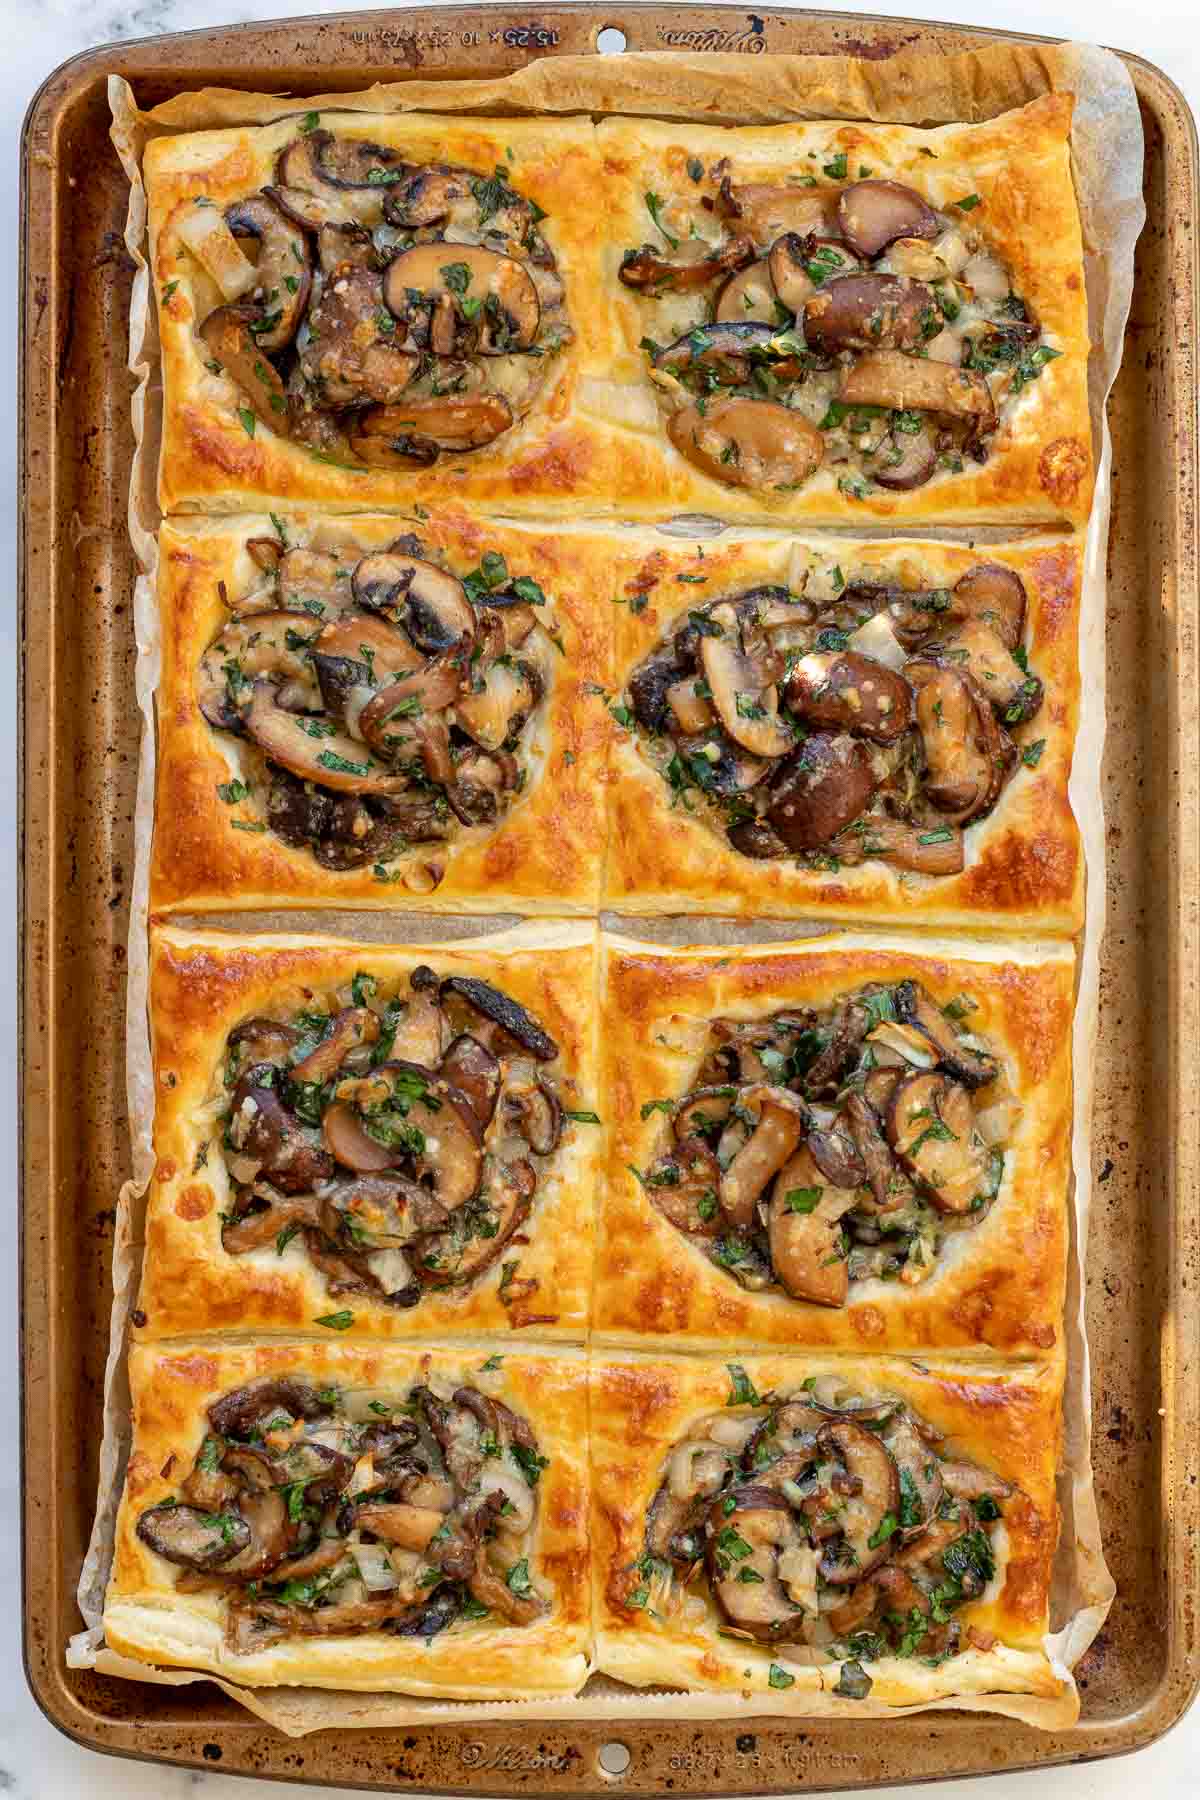 Mushroom tartlets straight out of the oven